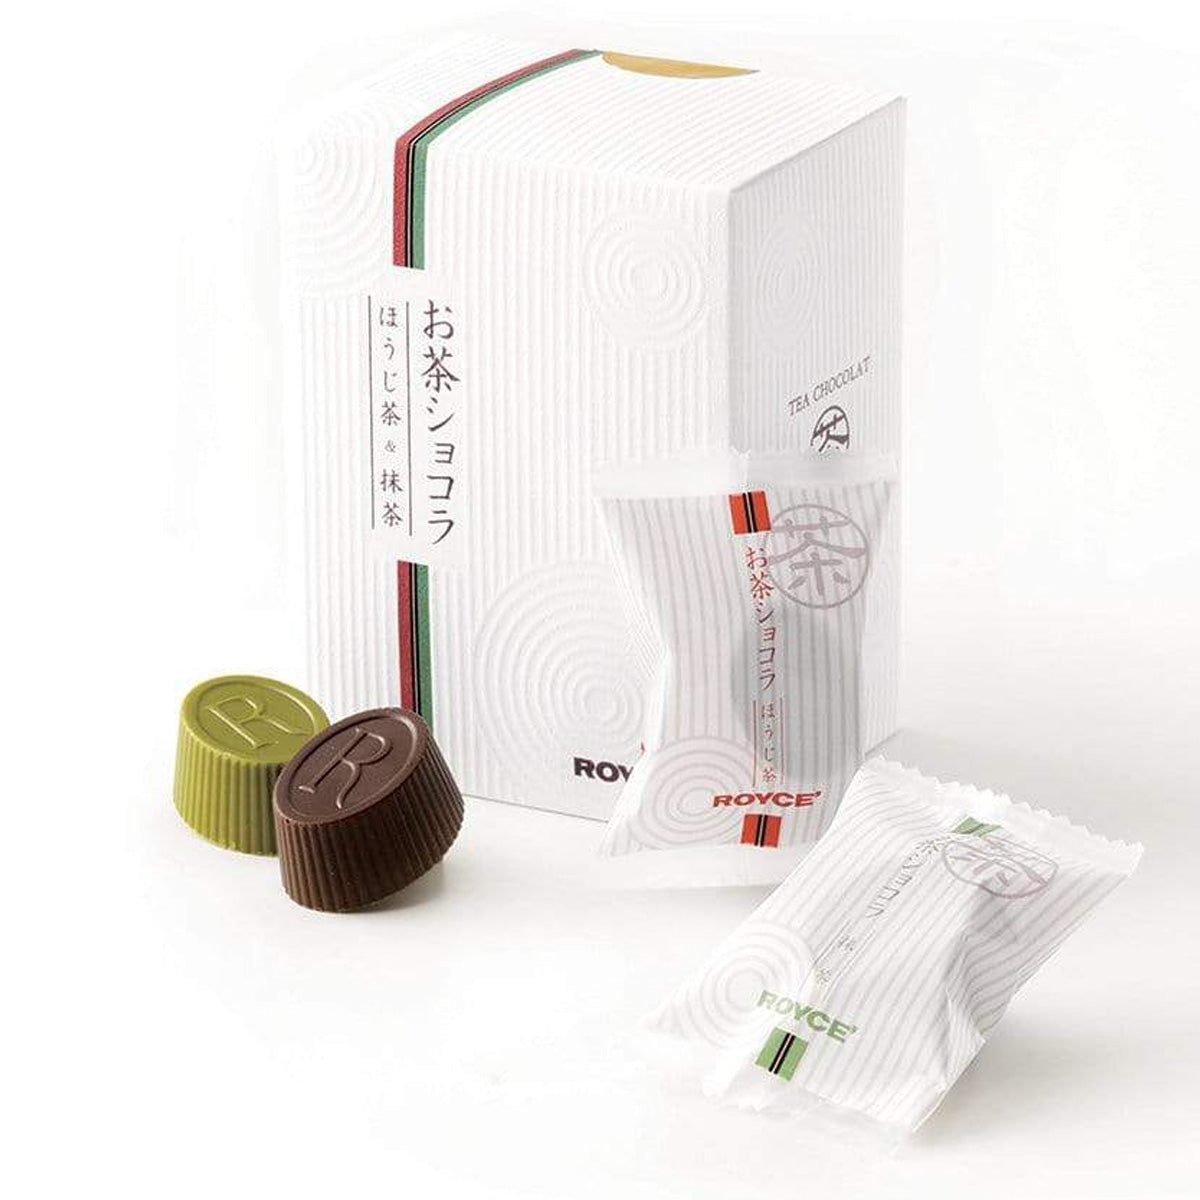 ROYCE' Chocolate - Tea Chocolat "Hojicha & Matcha" - Image shows a white box and packaged chocolates with accents of colors red and green. Visible words are Tea Chocolat and ROYCE'. On the left are green and brown chocolate cups engraved with the letter R.